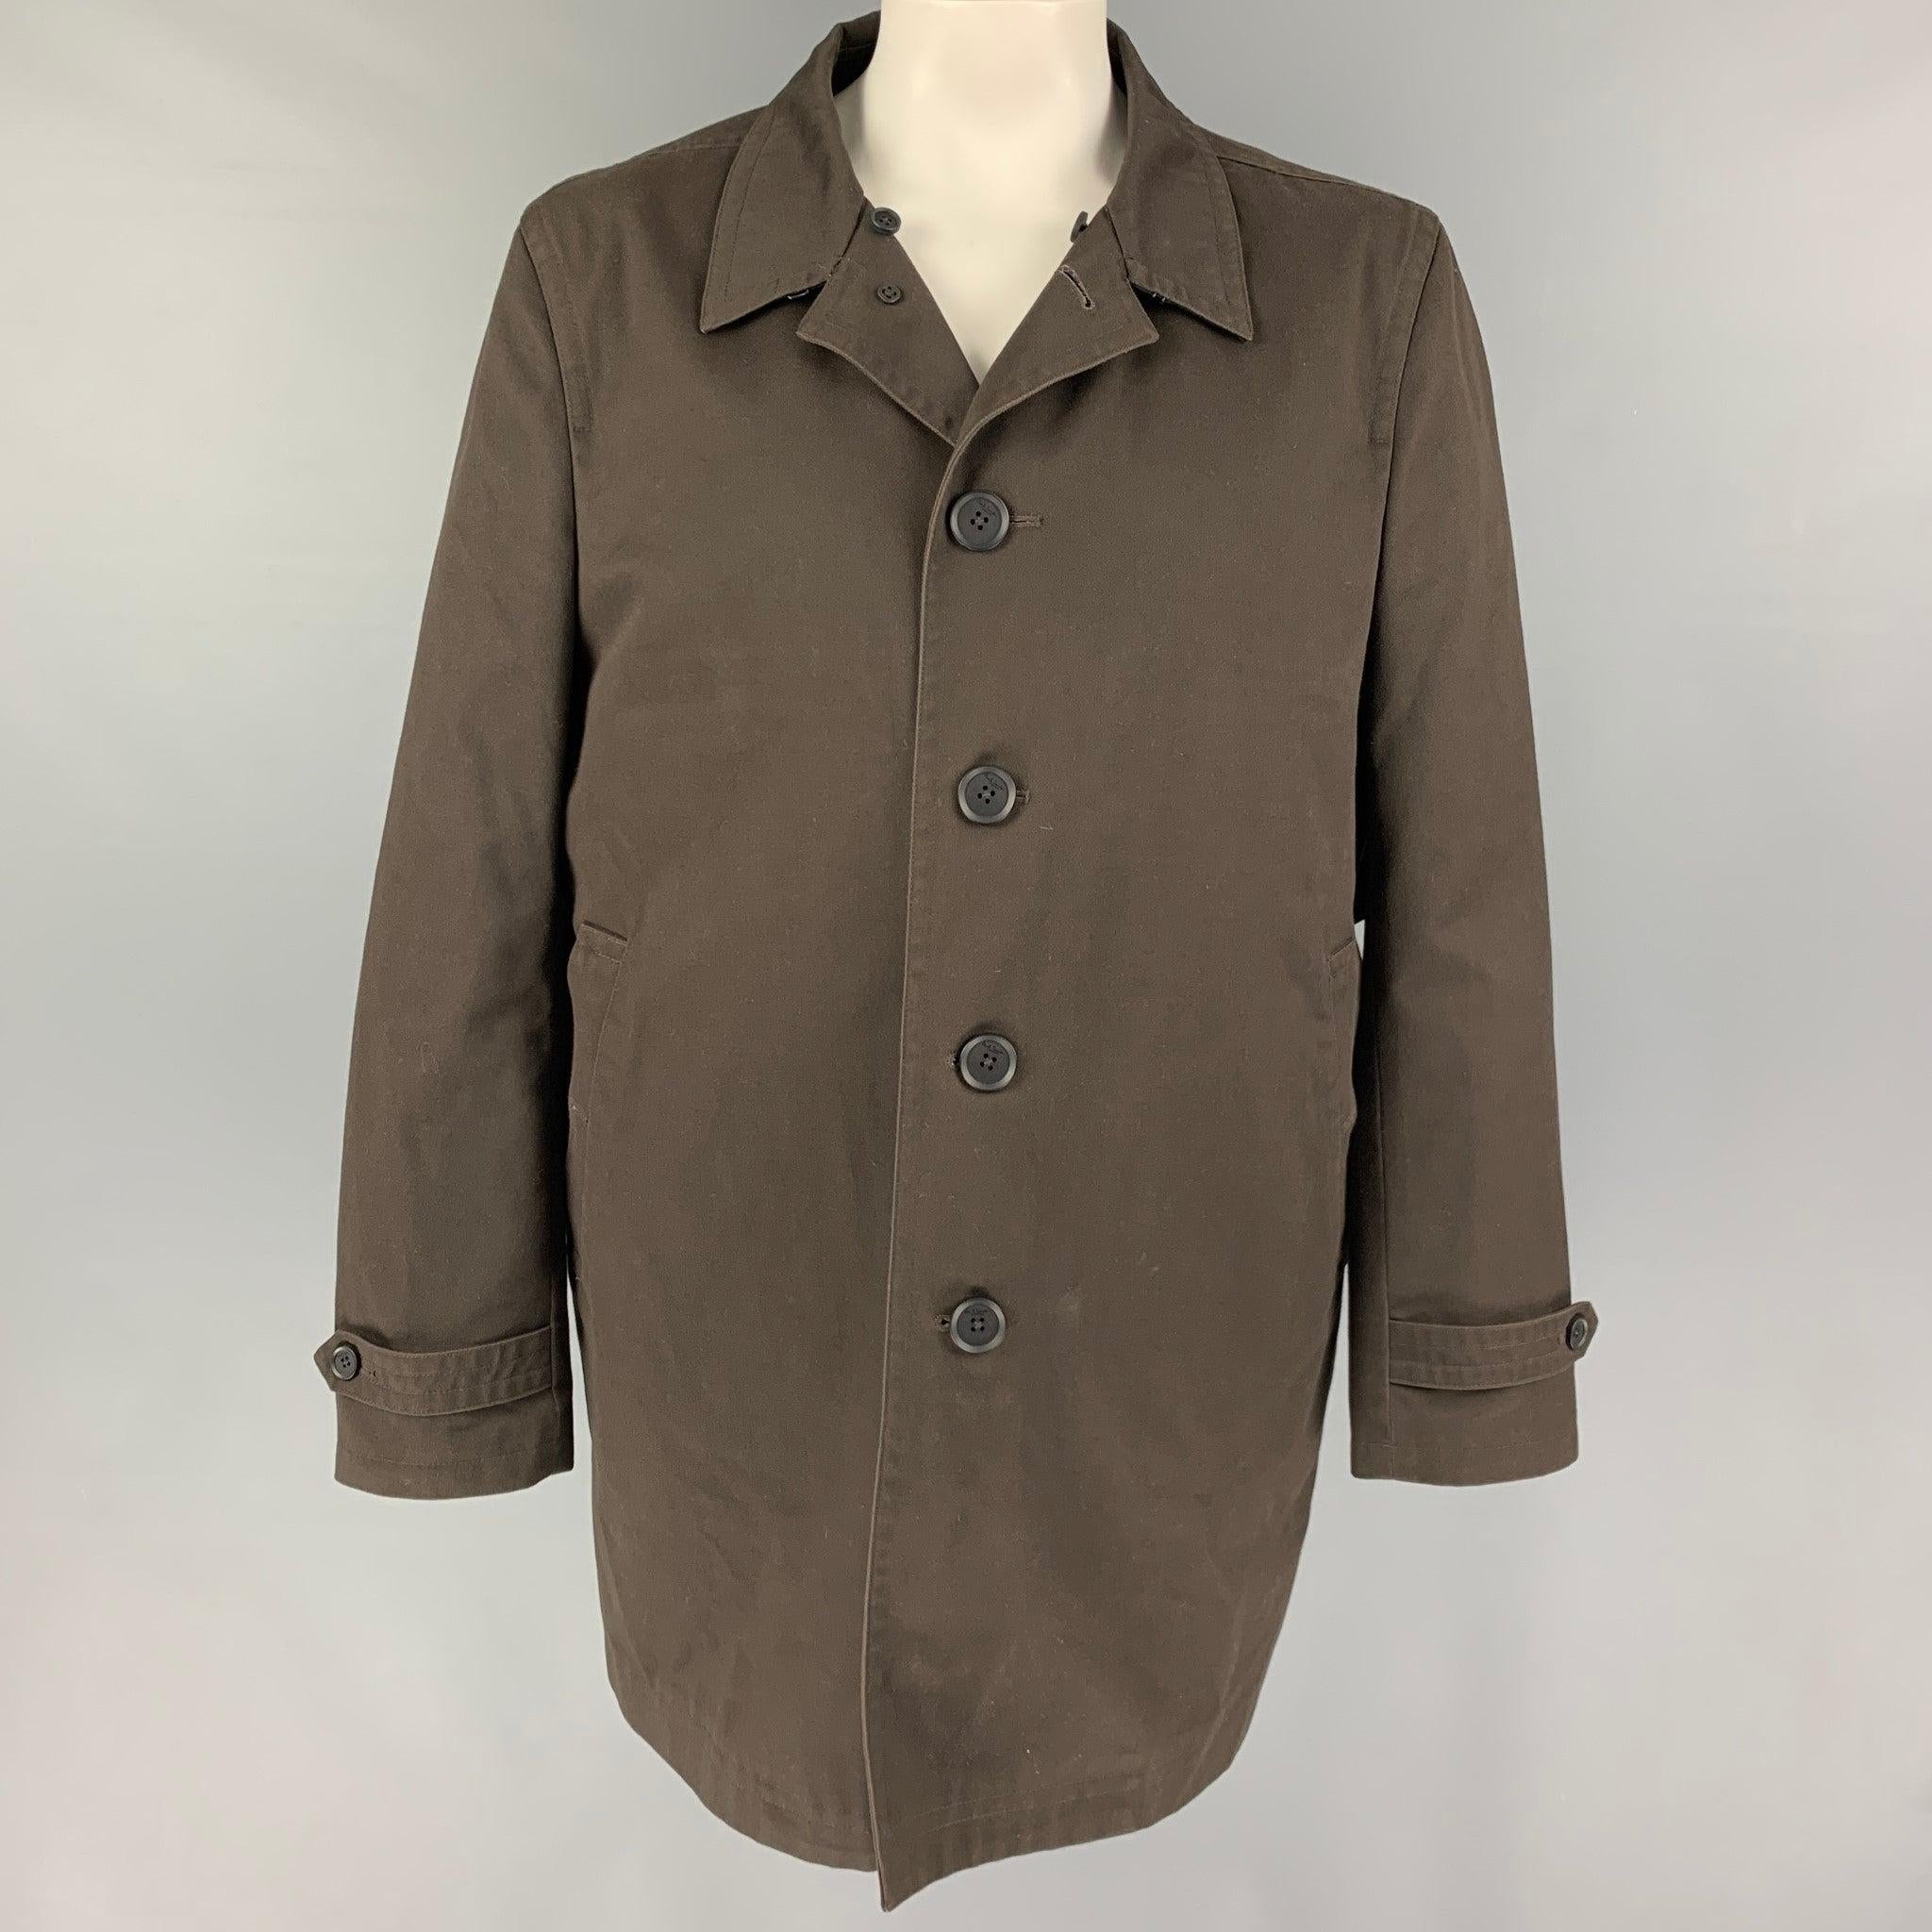 PAUL SMITH coat comes in a brown polyester / cotton with a detachable burgundy liner featuring a detachable shearling collar, back strap, slit pockets, and a buttoned closure. Very Good
Pre-Owned Condition. 

Marked:  XXL 

Measurements: 
